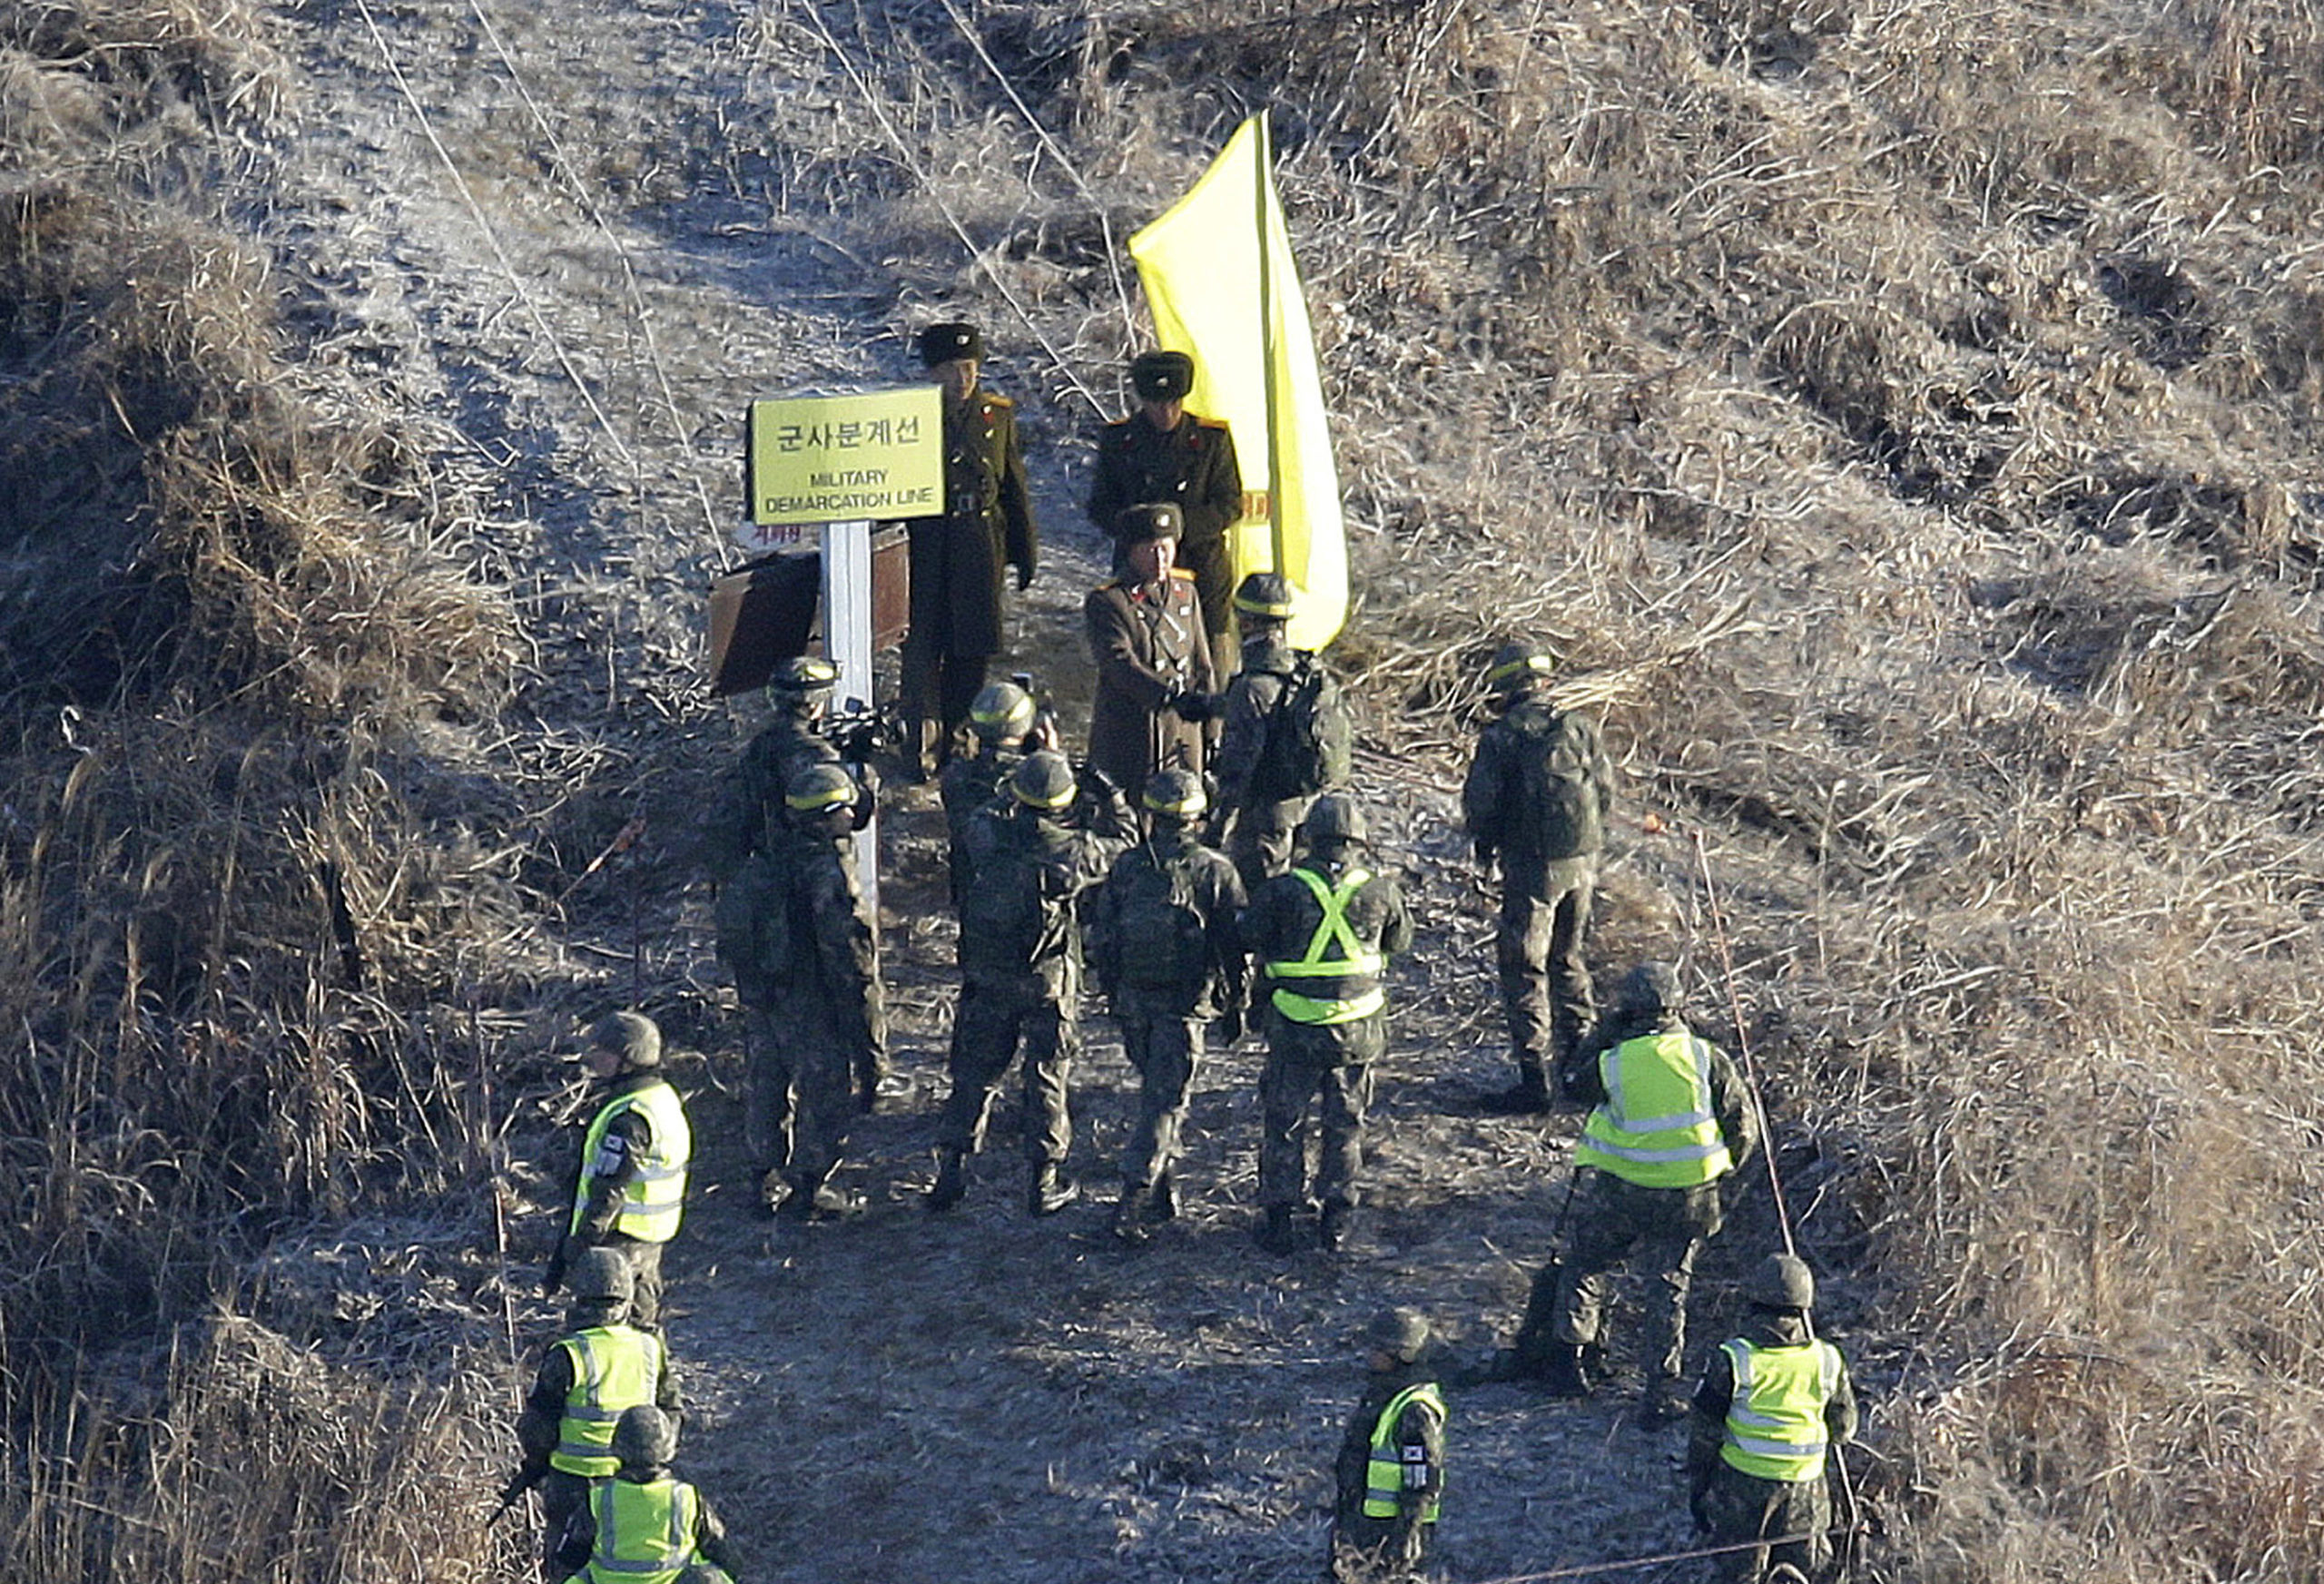 A South Korean army solider, center bottom, shakes hands with a North Korean army soldier, center top, before crossing the Military Demarcation Line inside the Demilitarized Zone to inspect a dismantled North Korean guard post in the central section of the inter-Korean border in Cheorwon on Dec. 12, 2018.